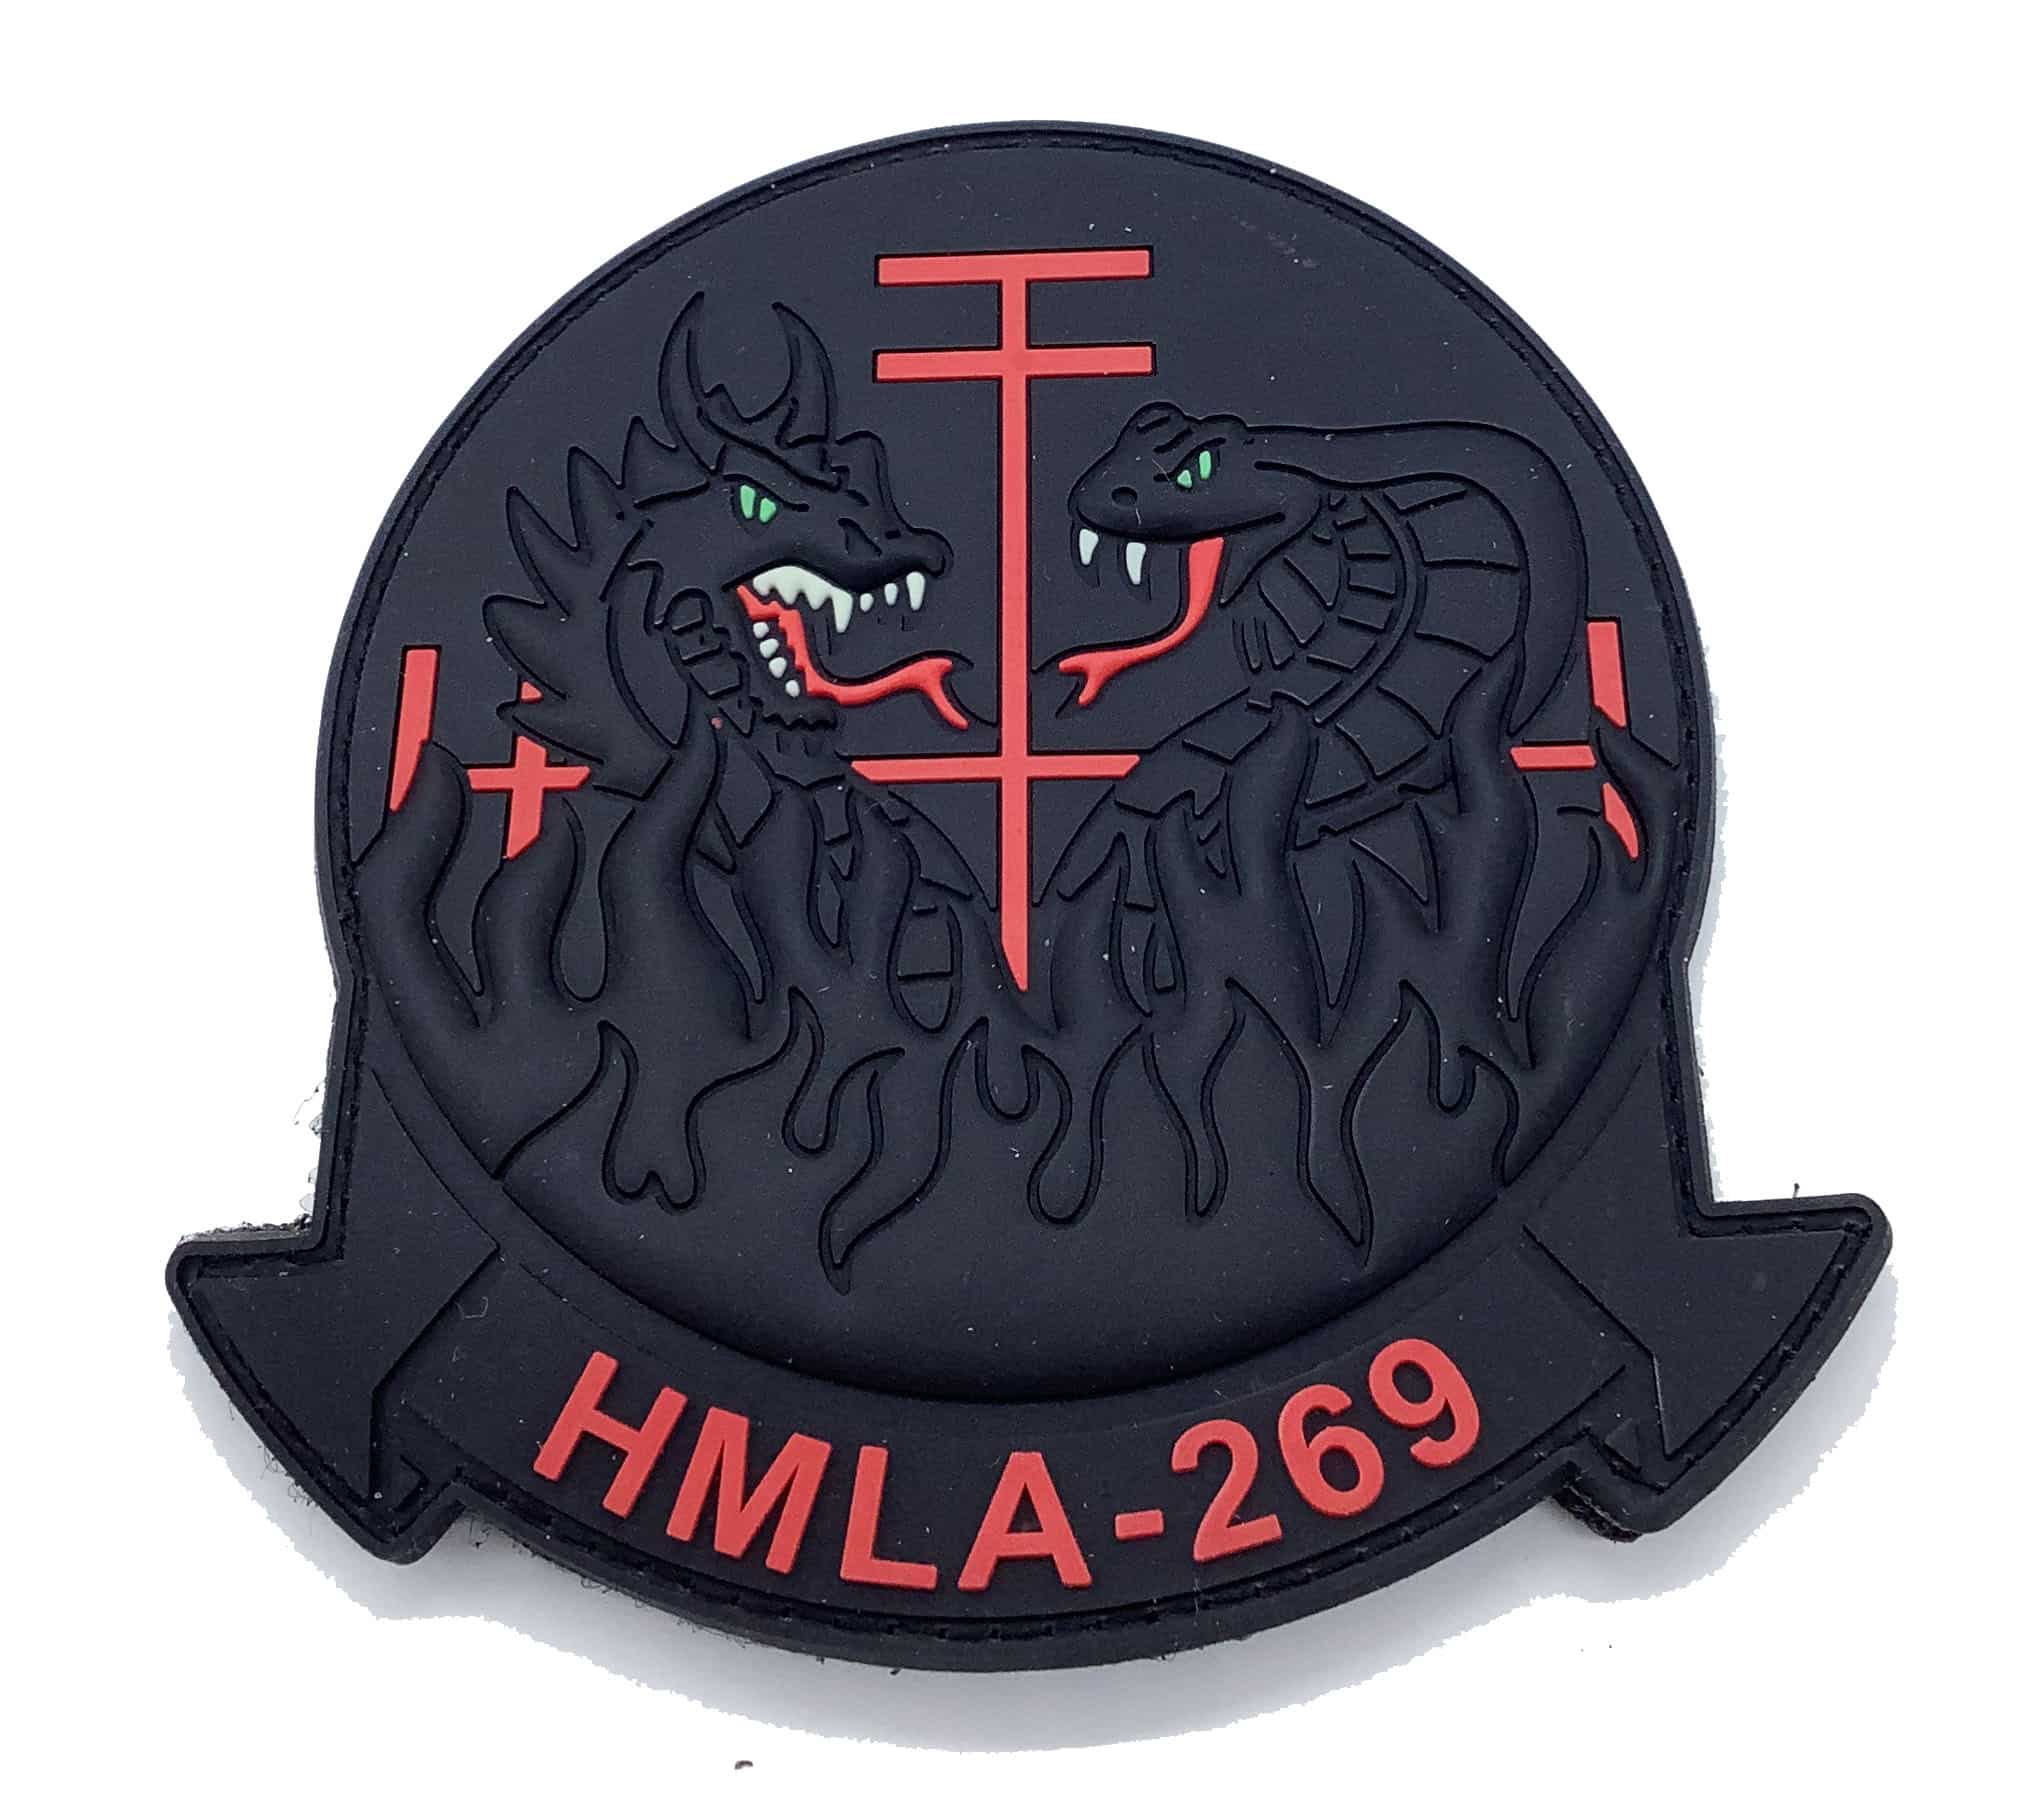 HMLA-269 Gunrunners Black PVC Patch – With Hook and Loop